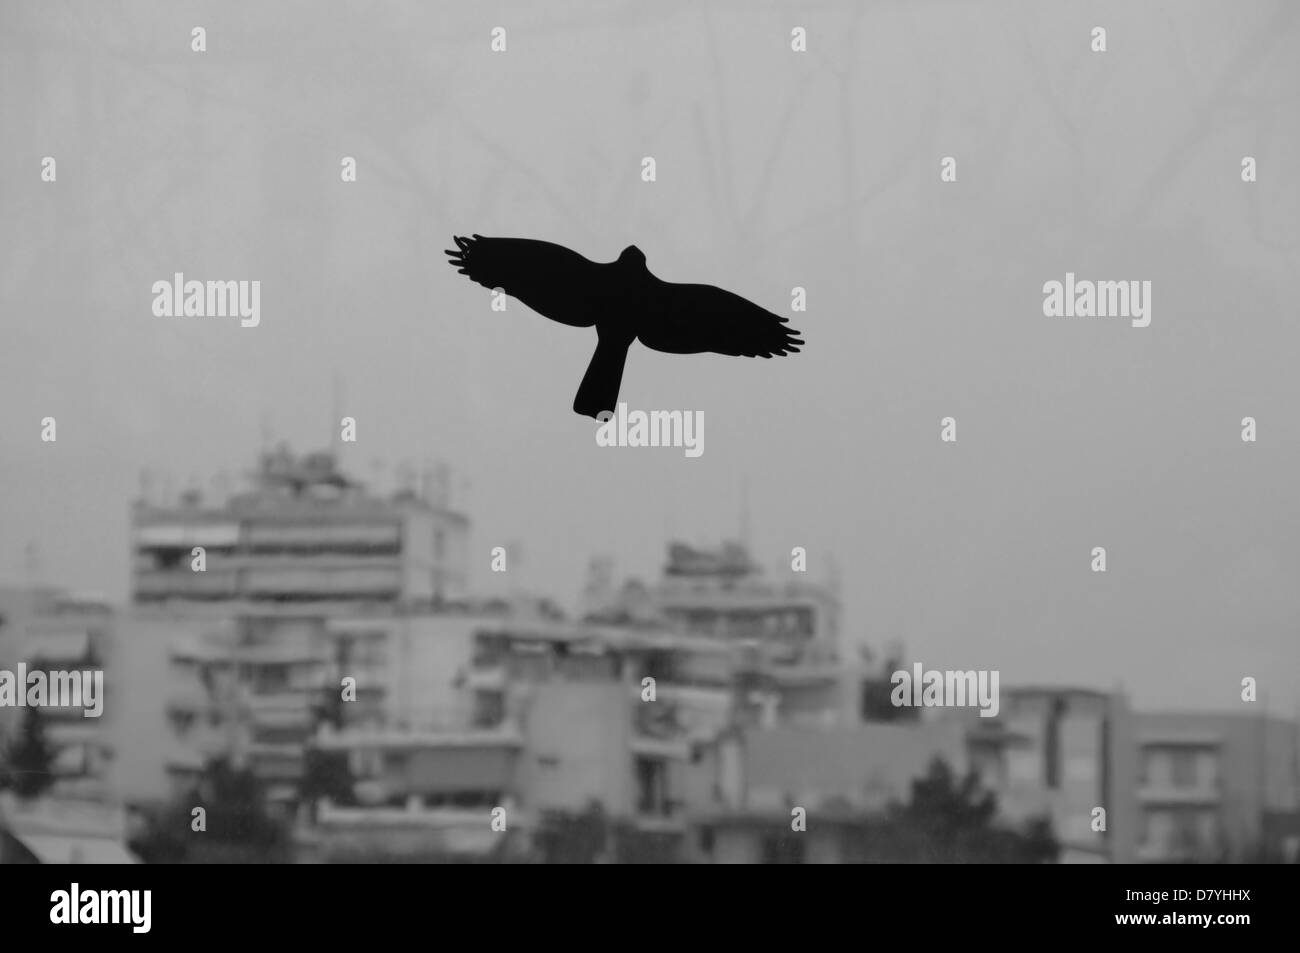 Black bird flying over moody city sky. Silhouette on stained glass of highway barrier. Stock Photo